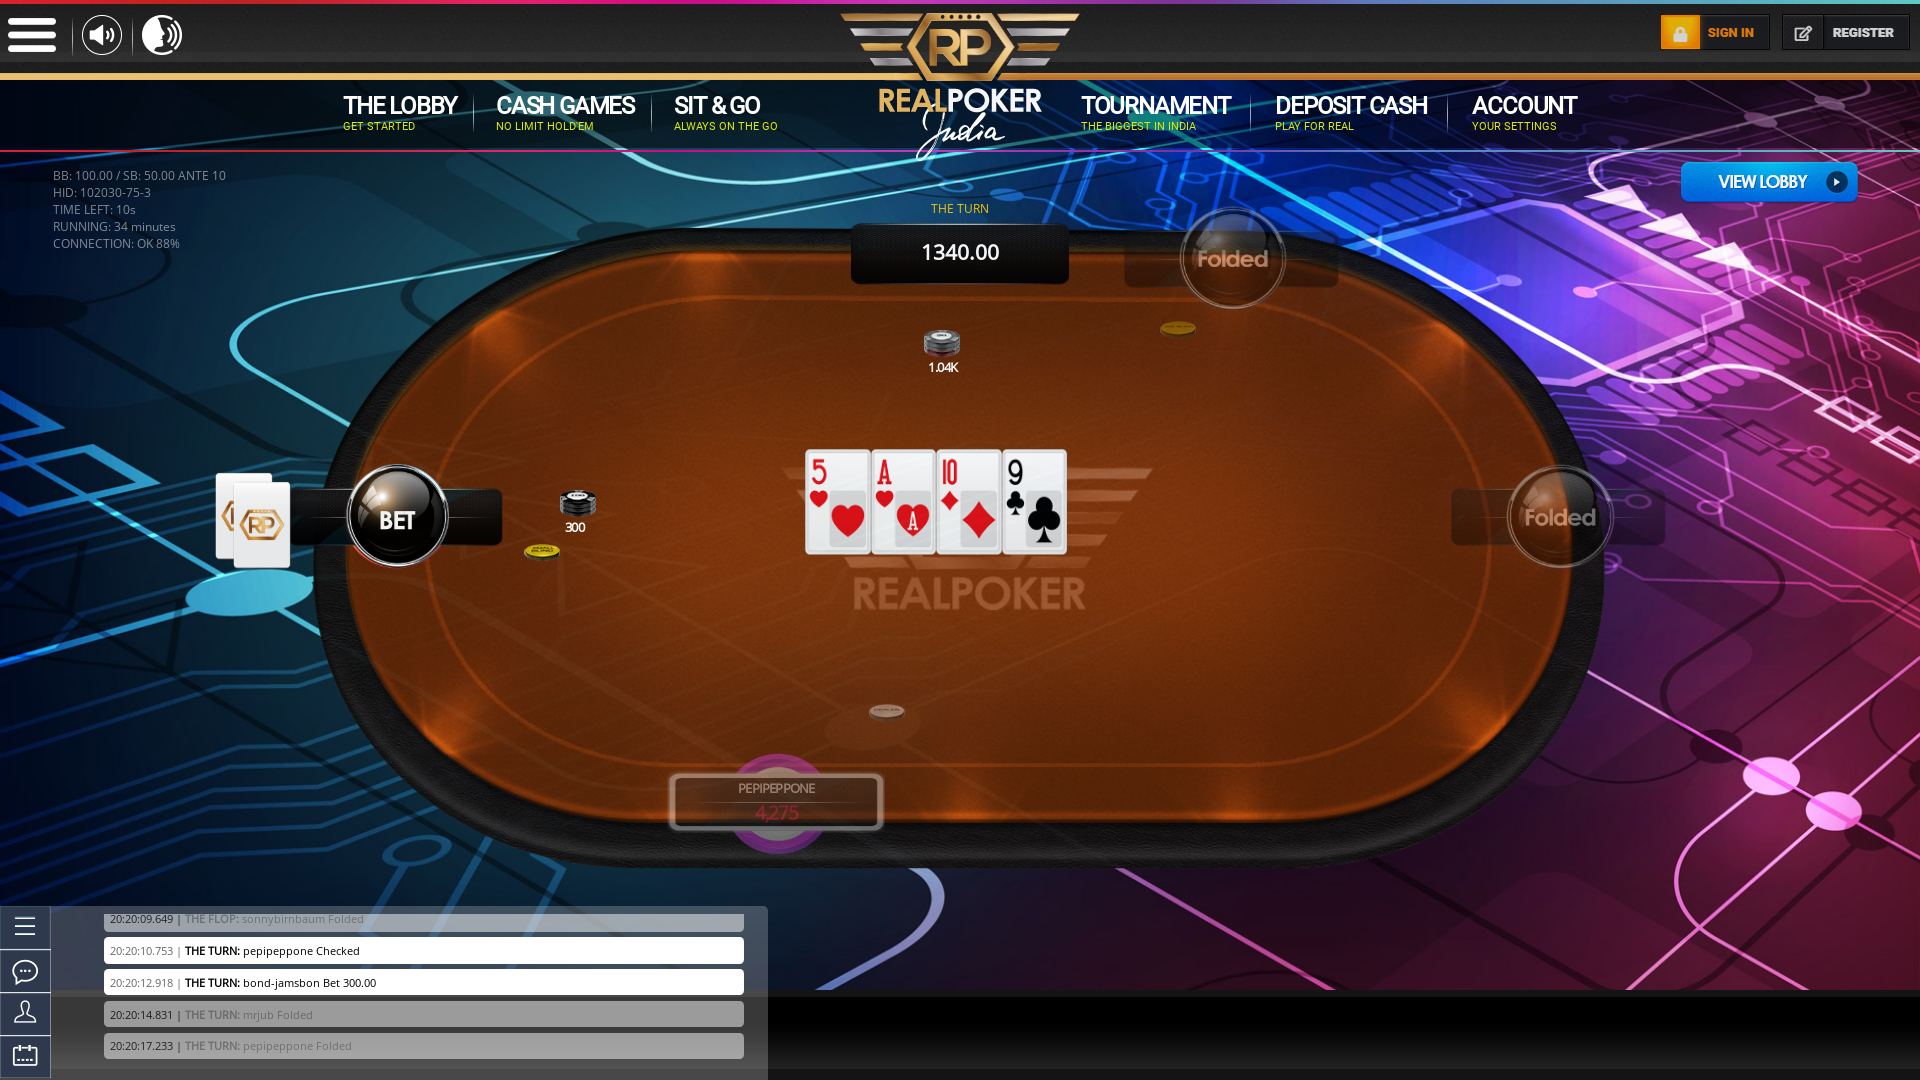 Real Indian poker on a 10 player table in the 34th minute of the game